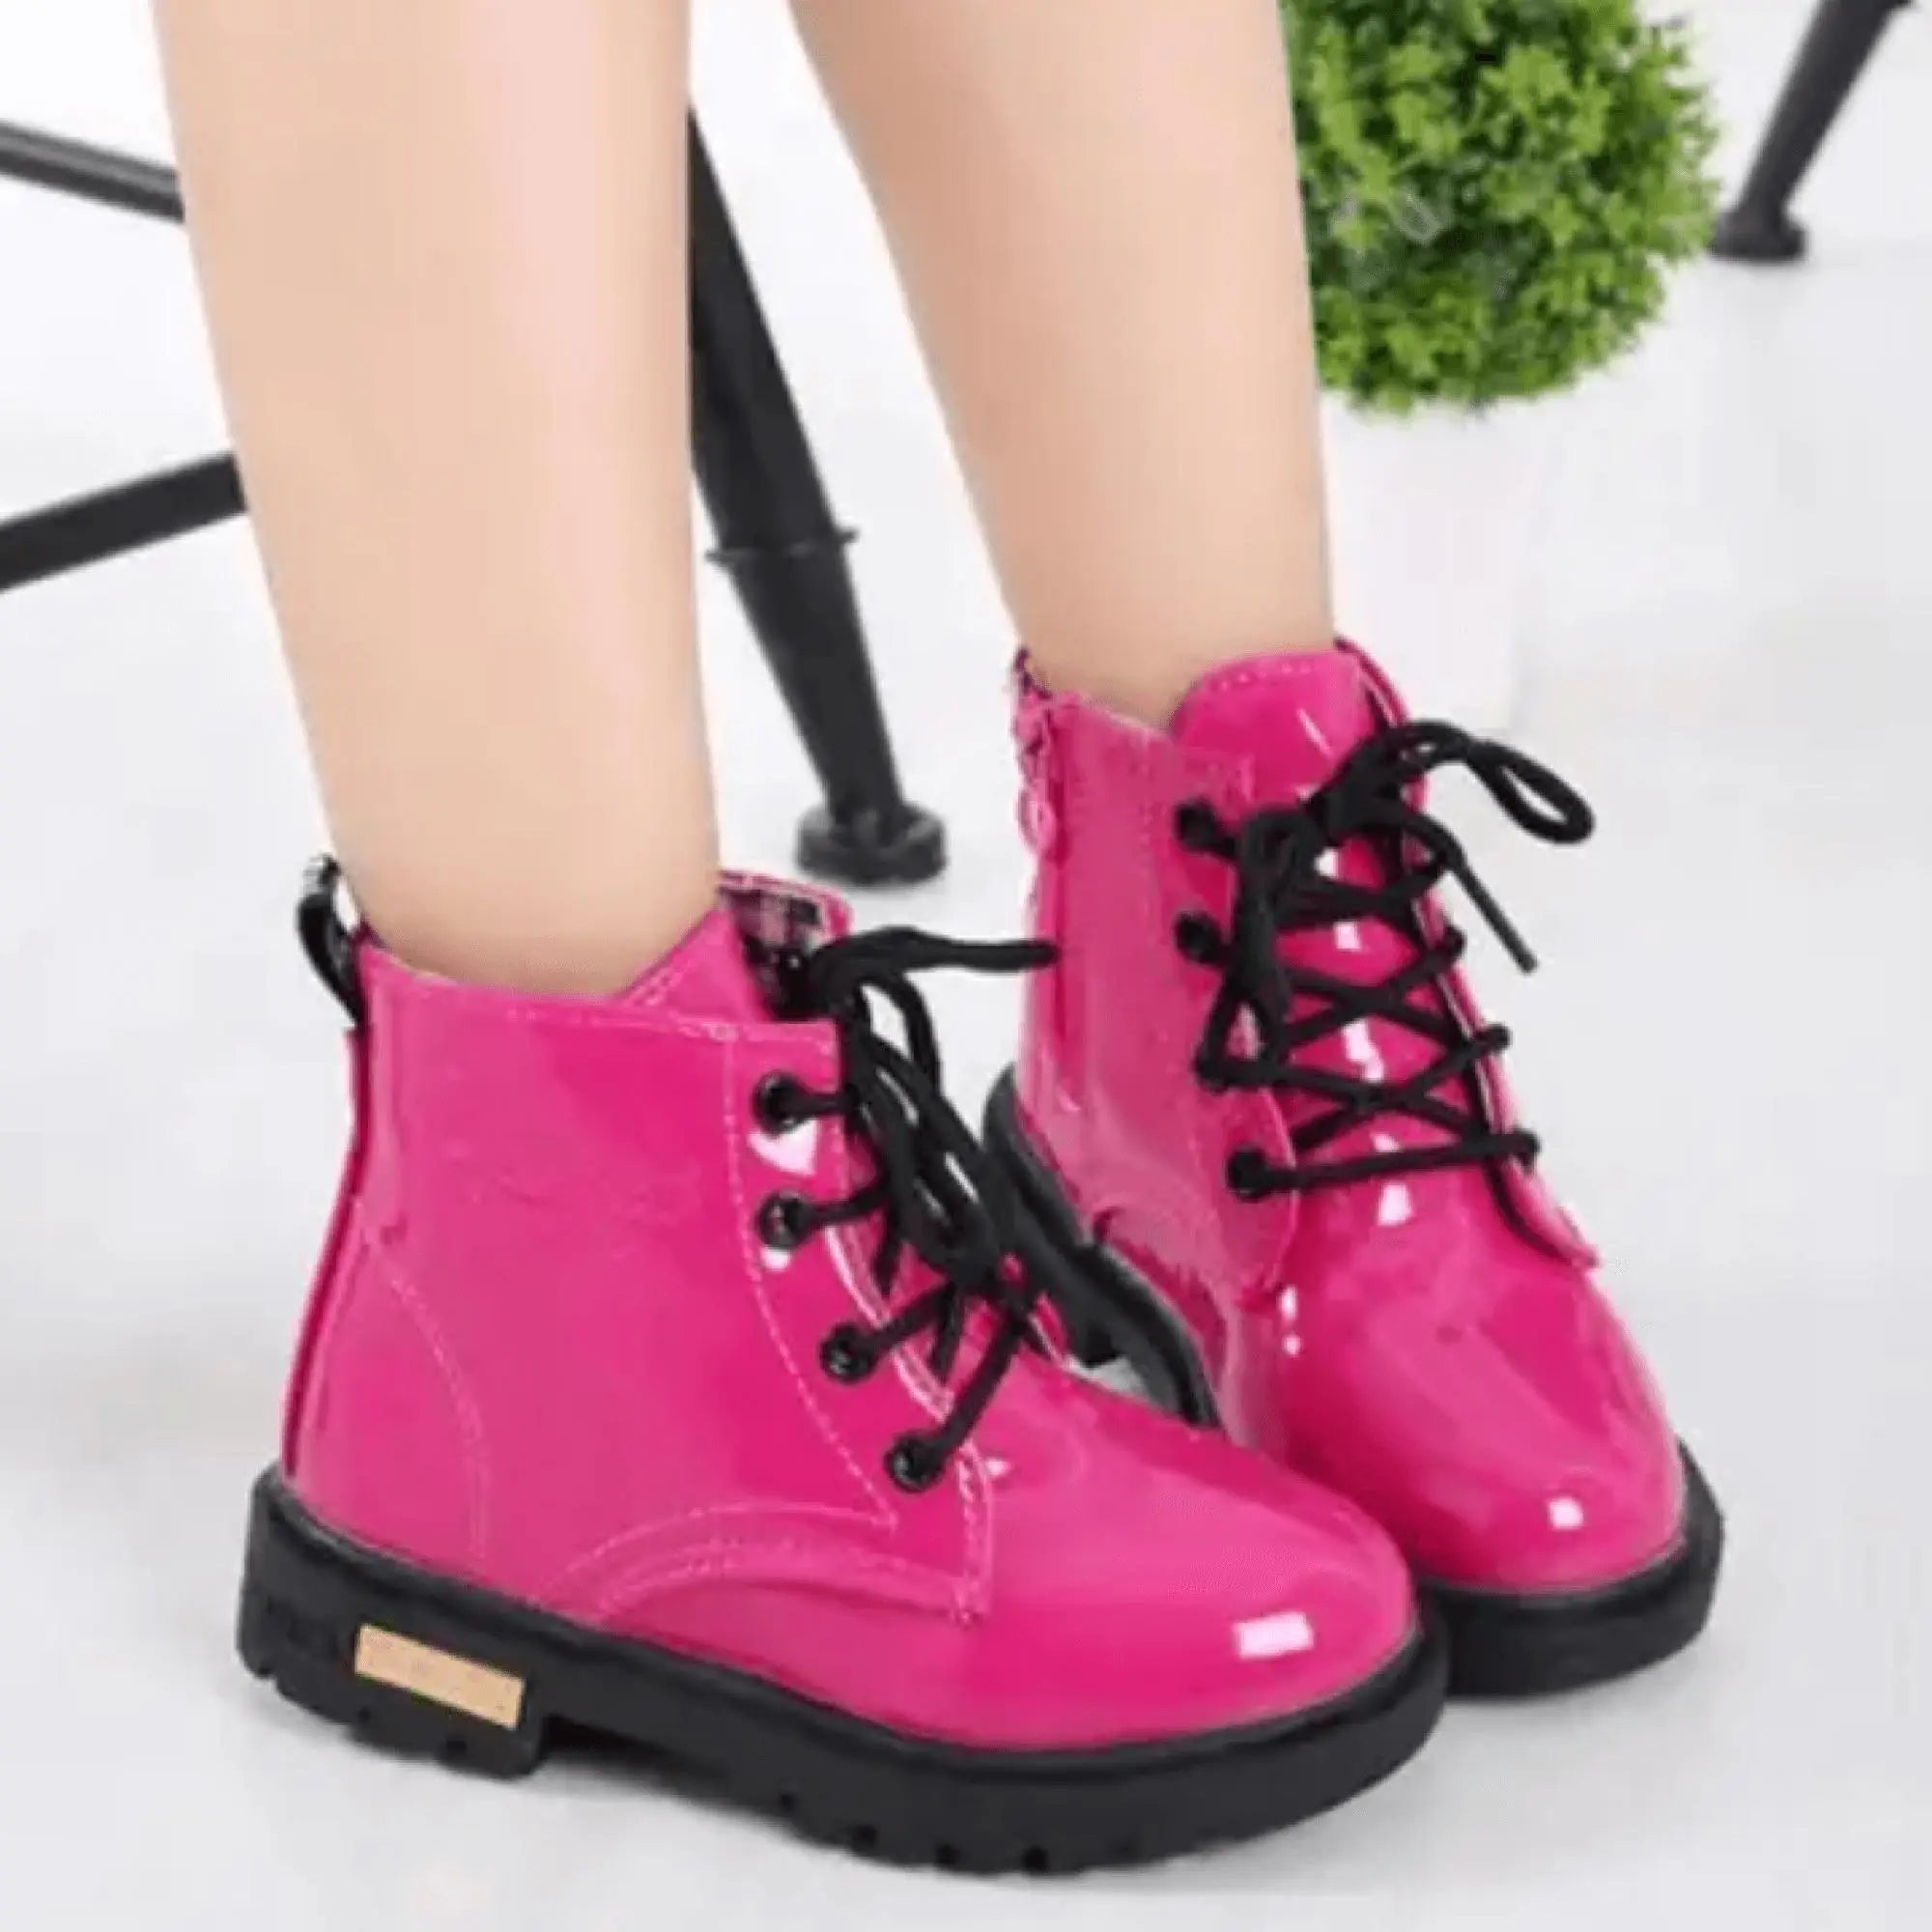 Toddler Girls Lace Up Side Zipper Combat Boots Waterproof Fashion